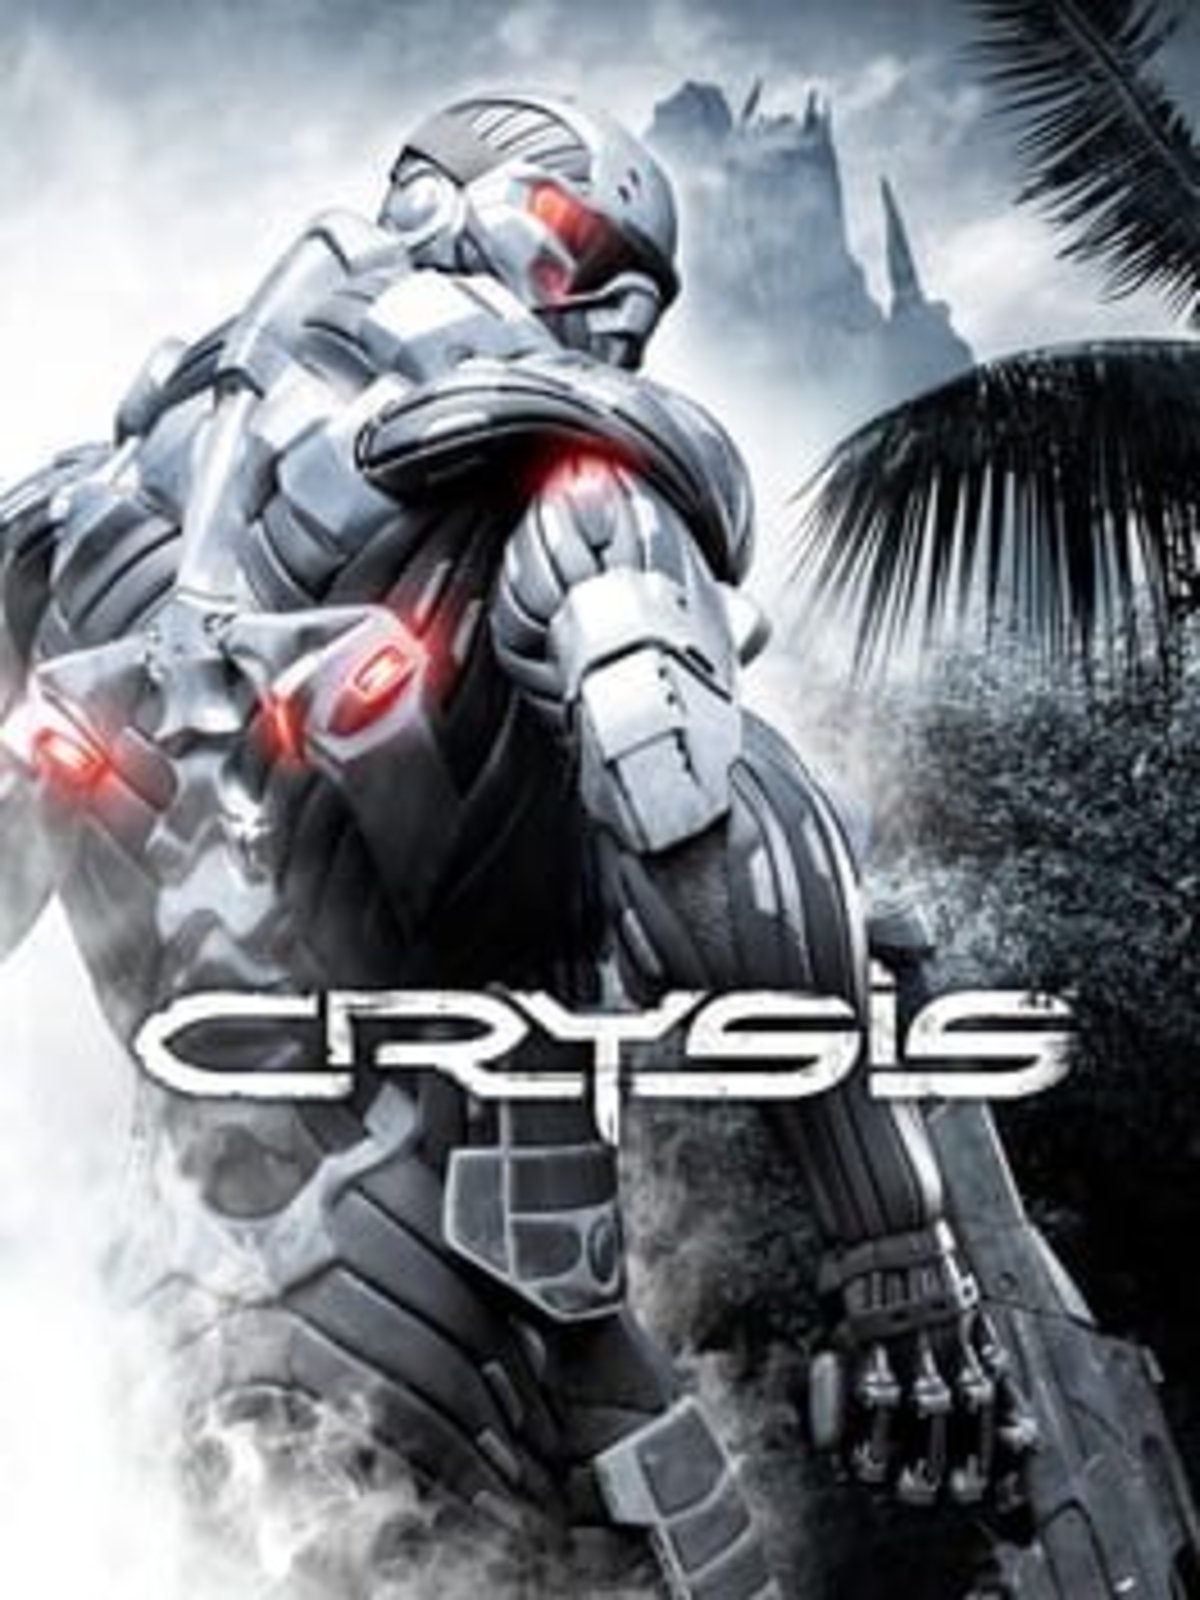 Crysis Remastered Trilogy Sets Release Date